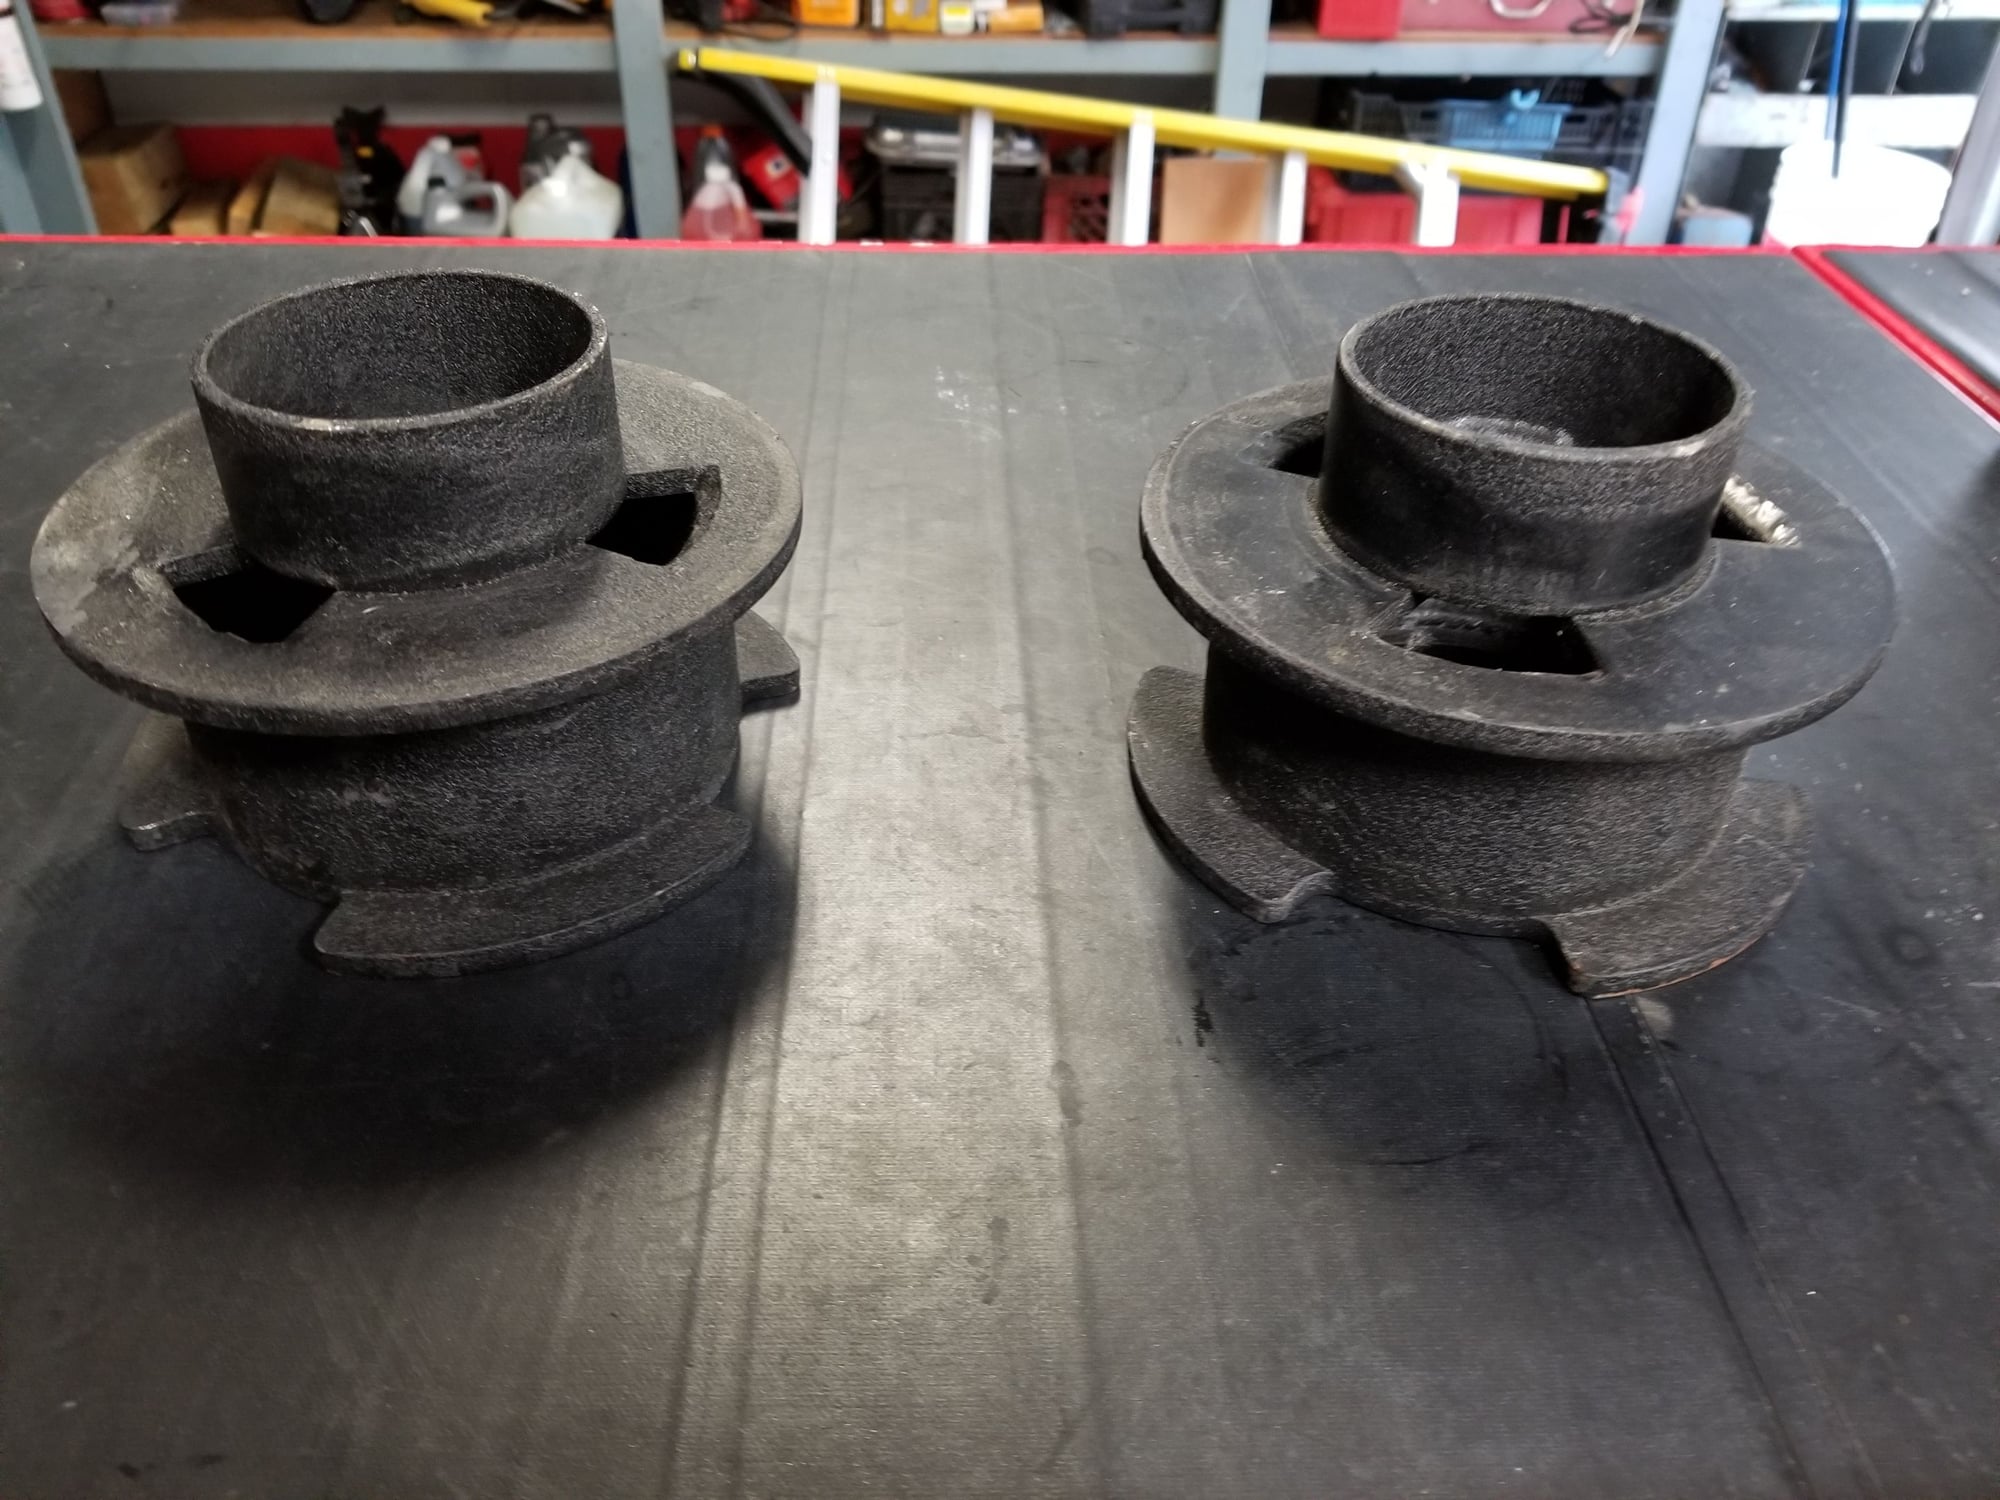 Steering/Suspension - 2 1/2" leveling kit - Used - 2017 to 2019 Ford F-250 Super Duty - Port Huron, MI 48060, United States